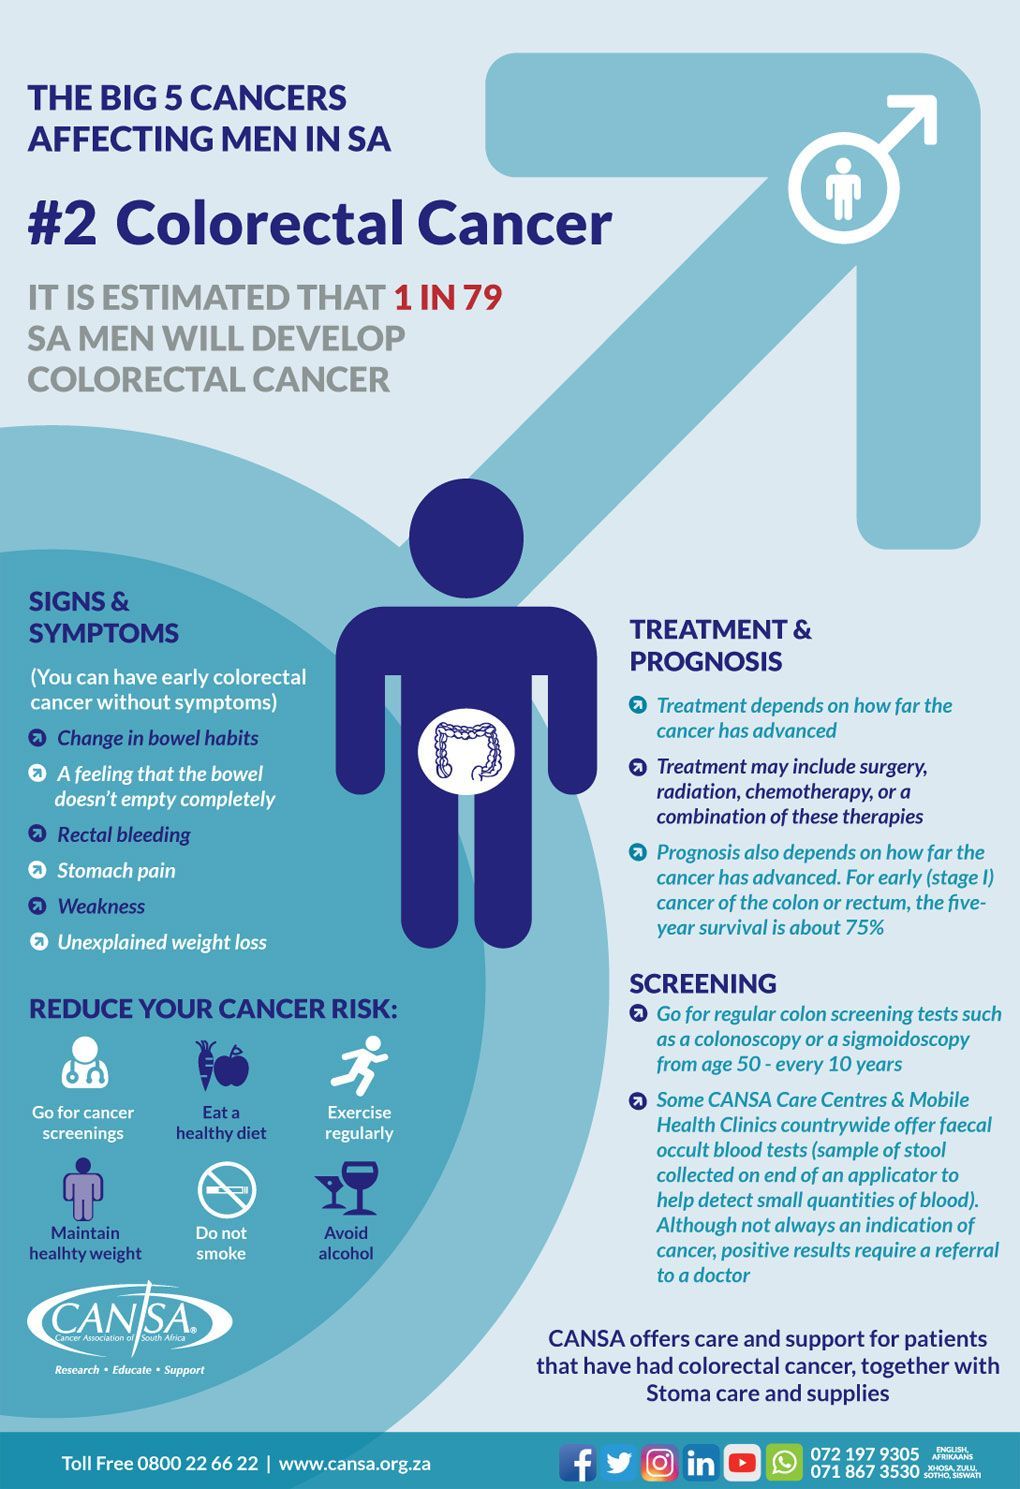 The big 5 cancers affecting men in South Africa